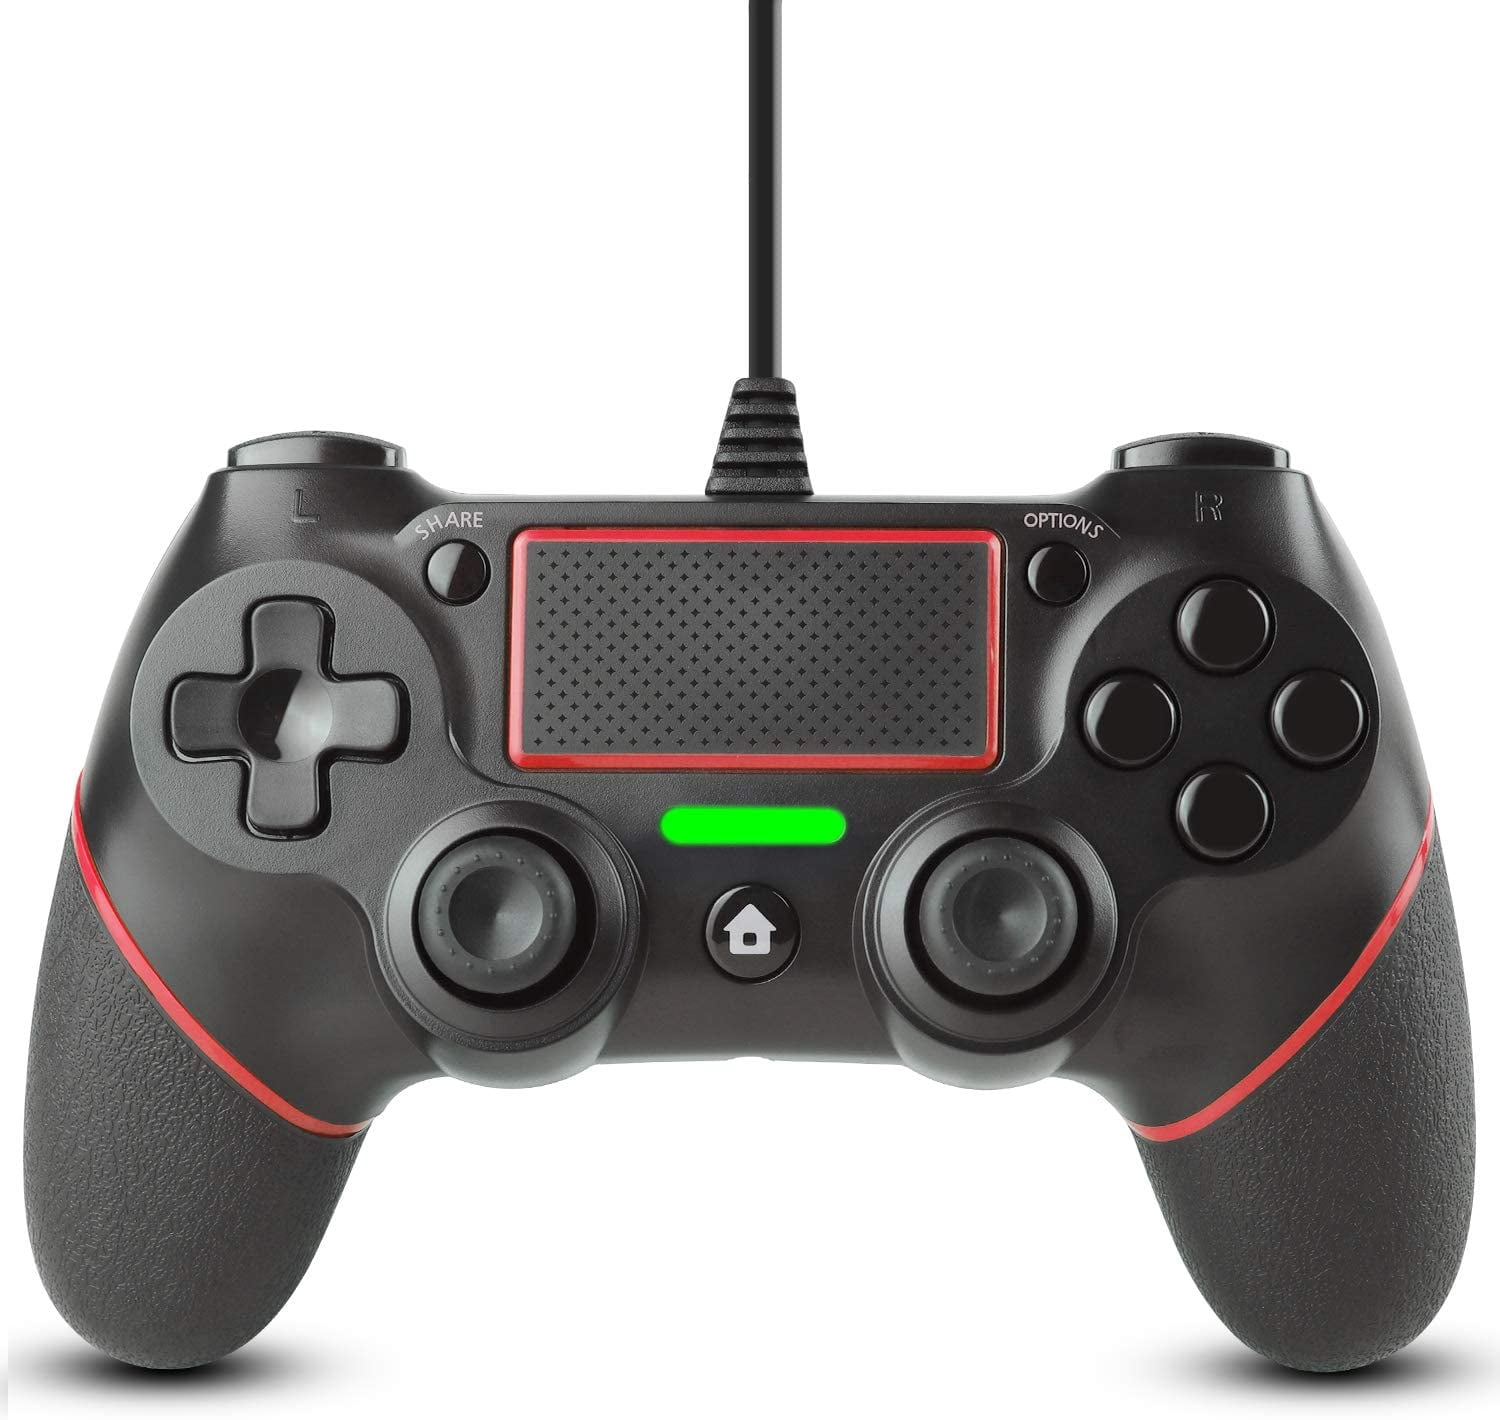 Wired PS4 Controller Compatible for Play-station 4/pro/Slim/PC/Laptop, 6.5ft Cable Length USB Gamepad Wired with Colored LED Indicator, Vibration and Anti Slip Grip(Red) - Walmart.com